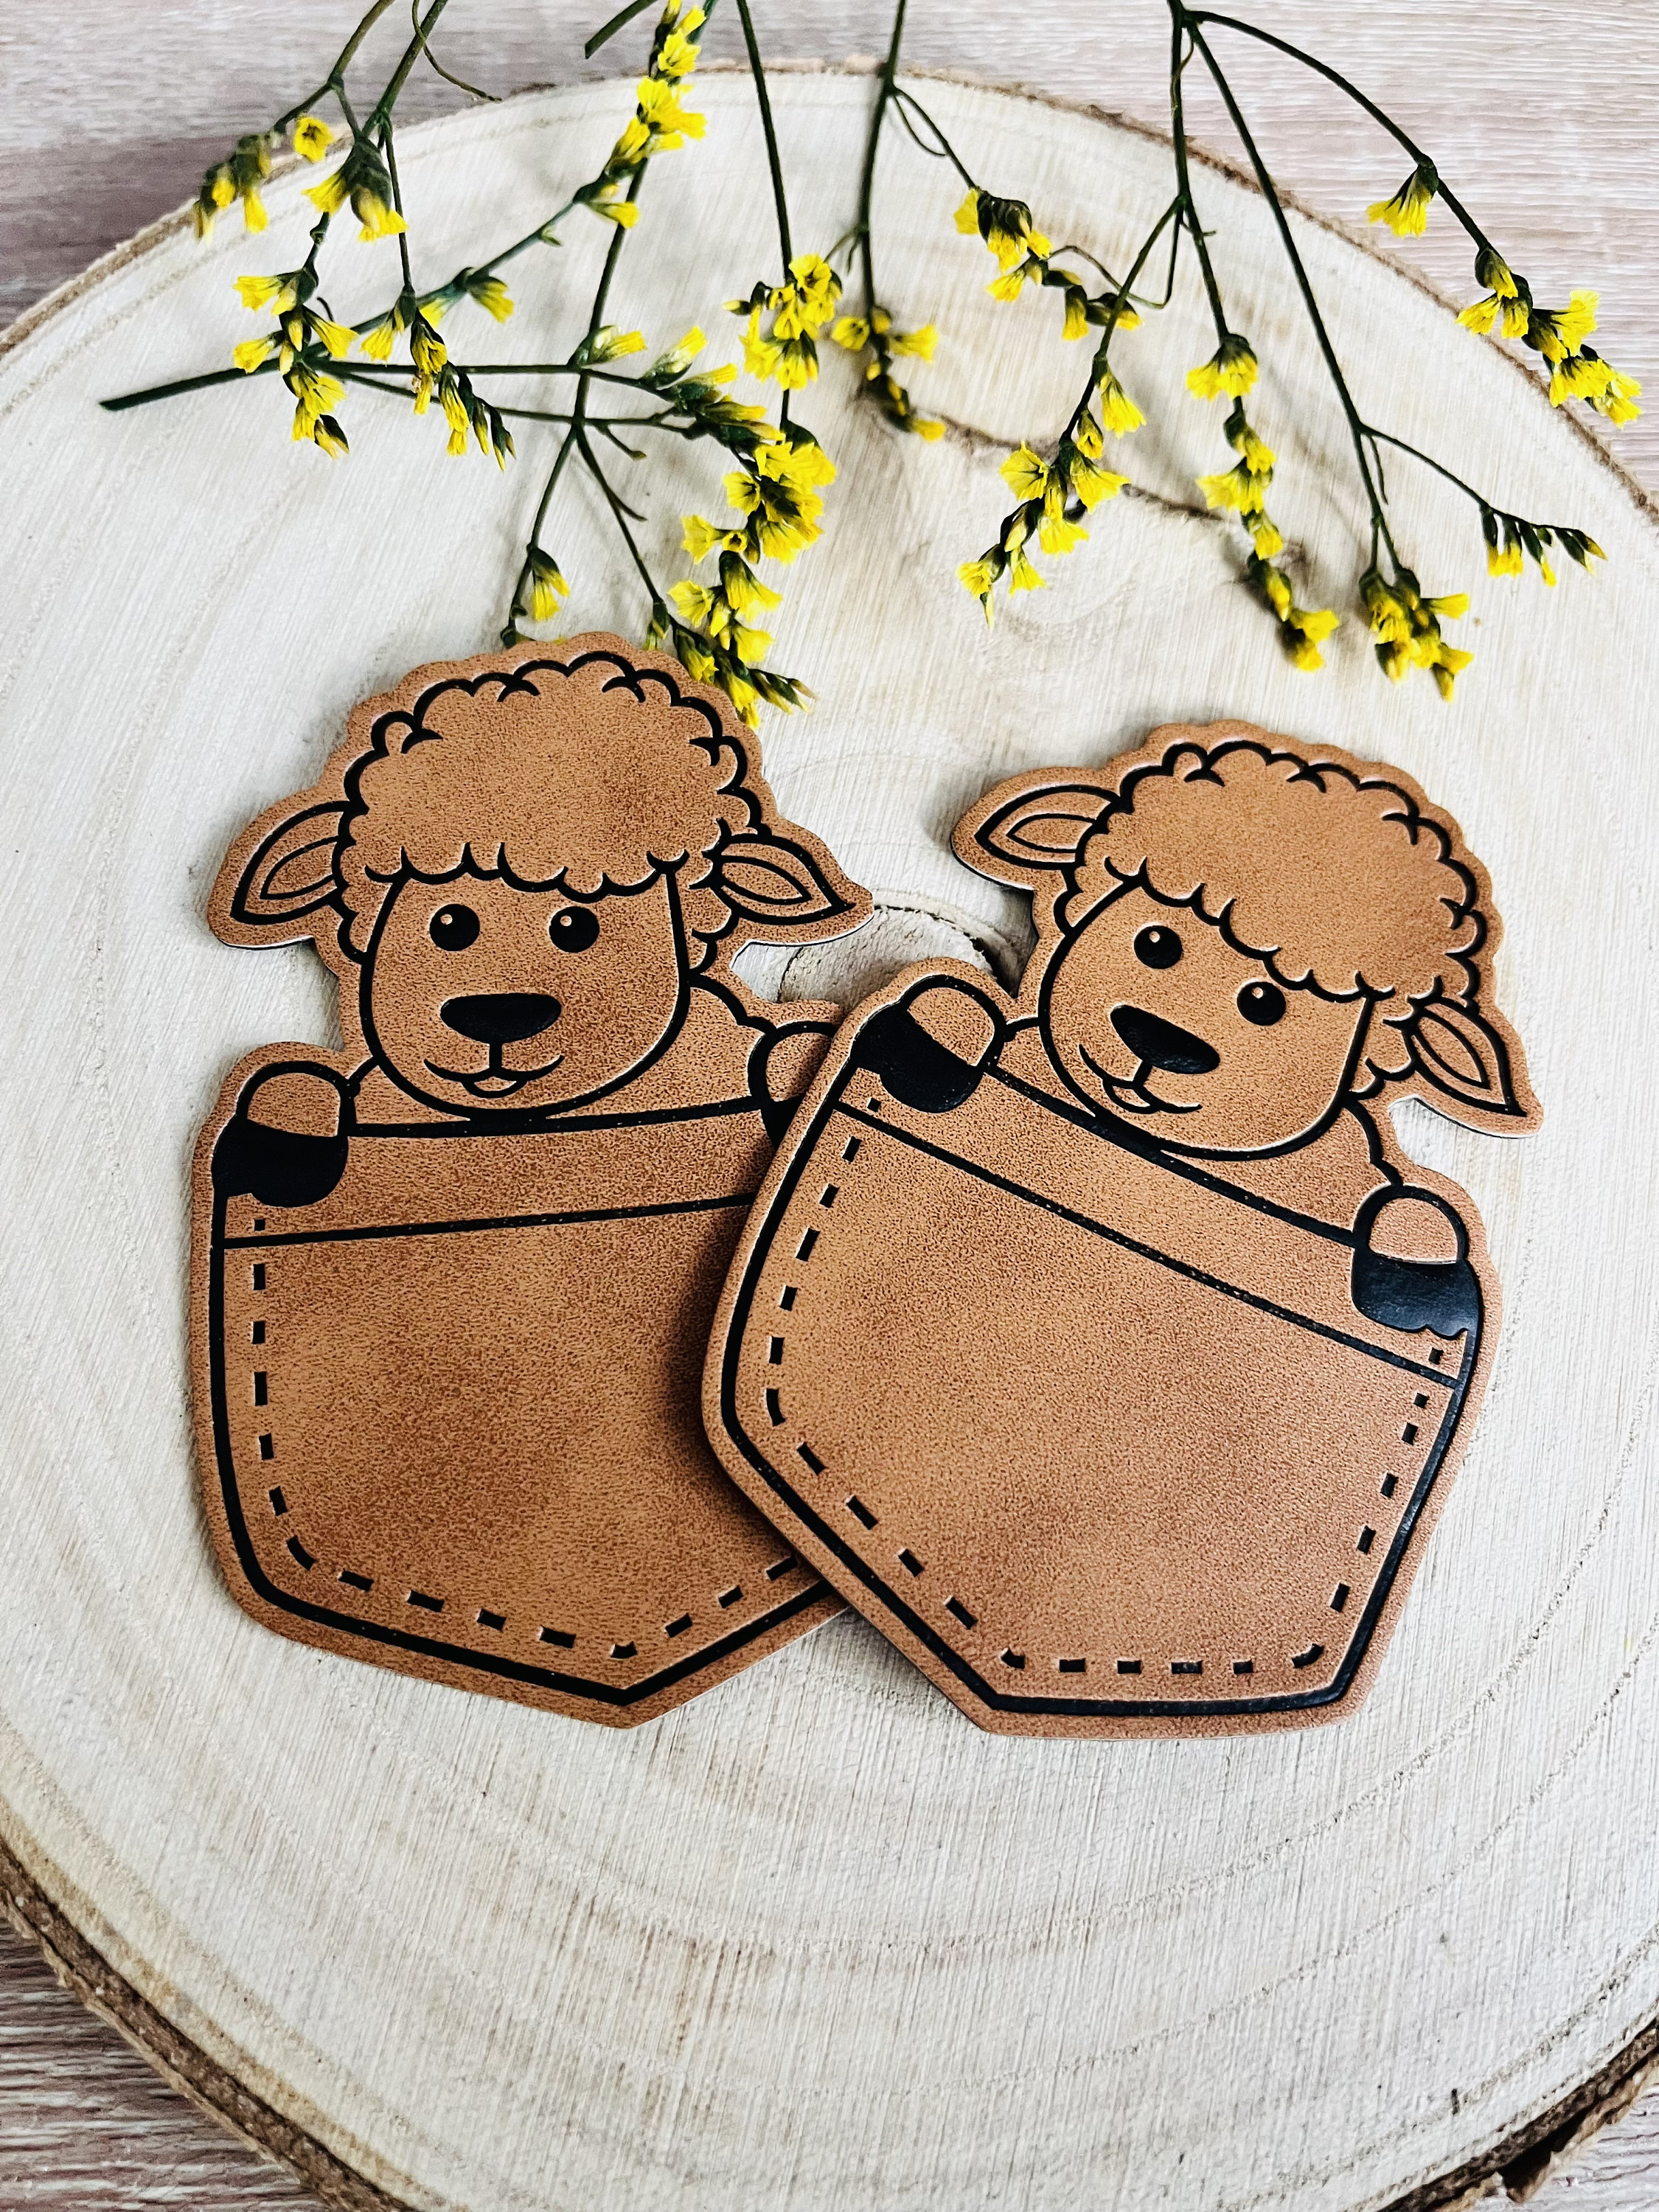 Embroidered Metal Patches for Dogs Custom Designed Patches for Dog